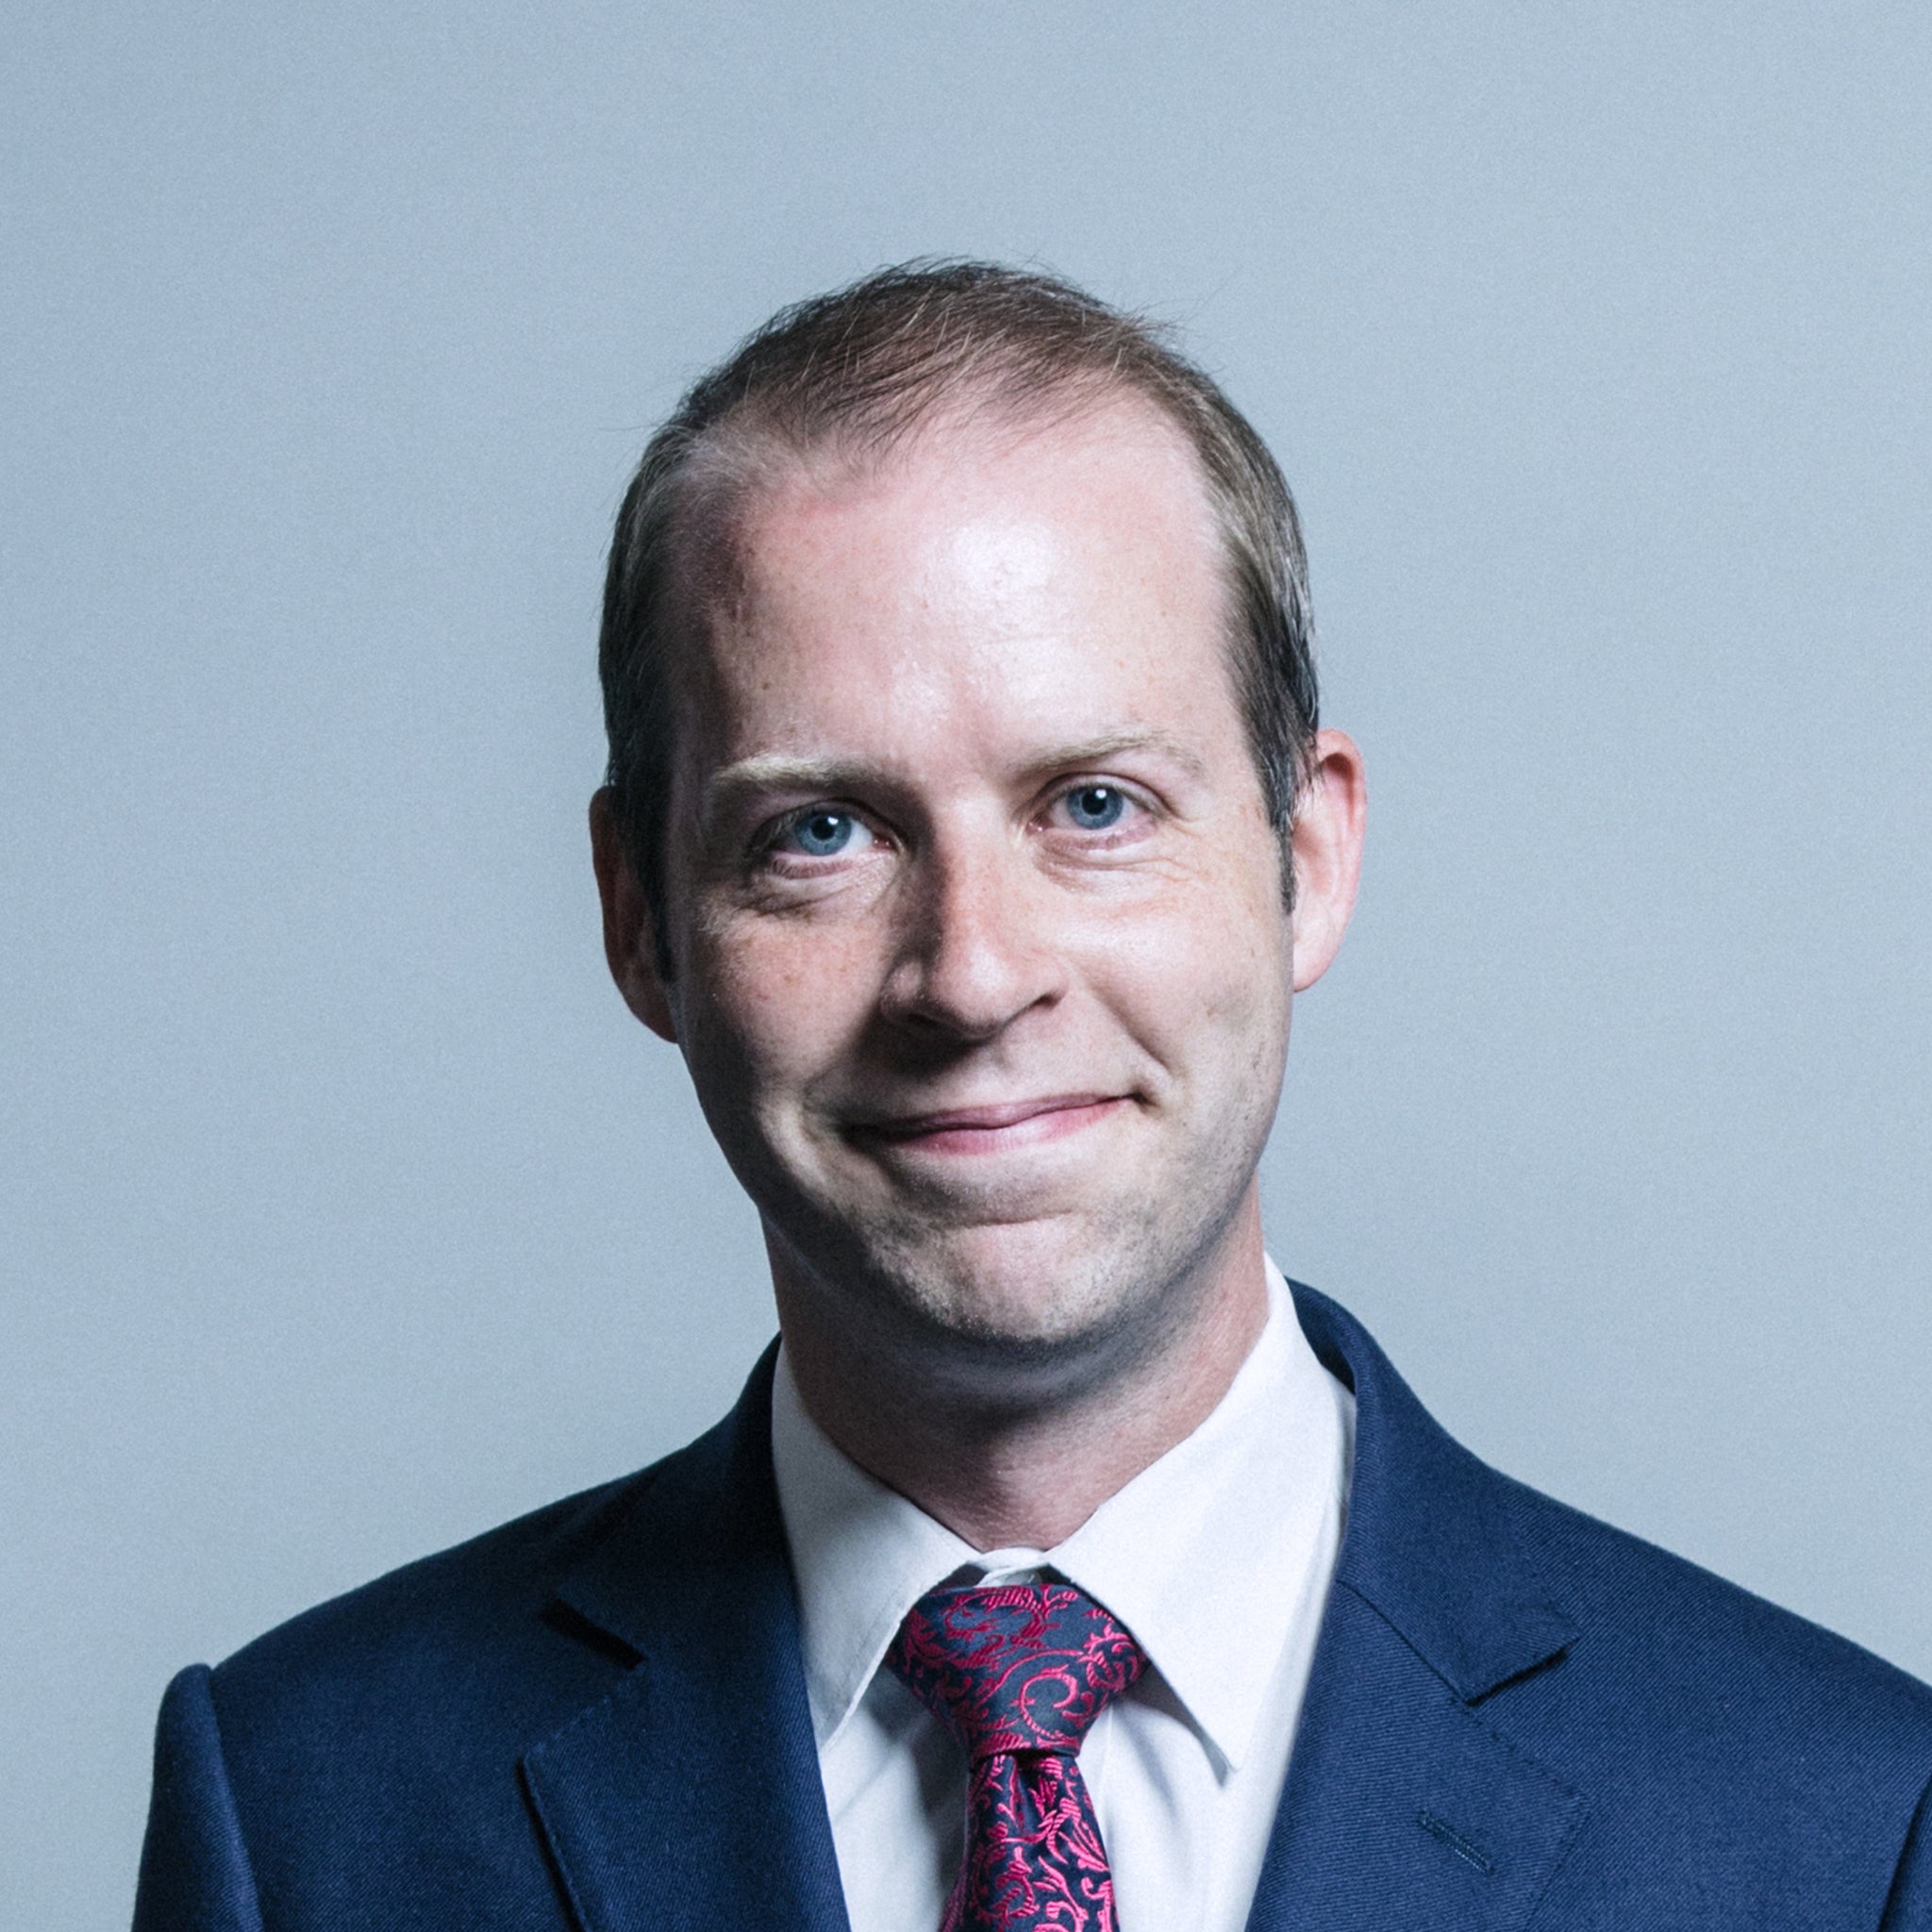 Shadow work and pensions secretary Jonathan Reynolds called on Tory MPs to ‘do the right thing’ and back a vote on the decision